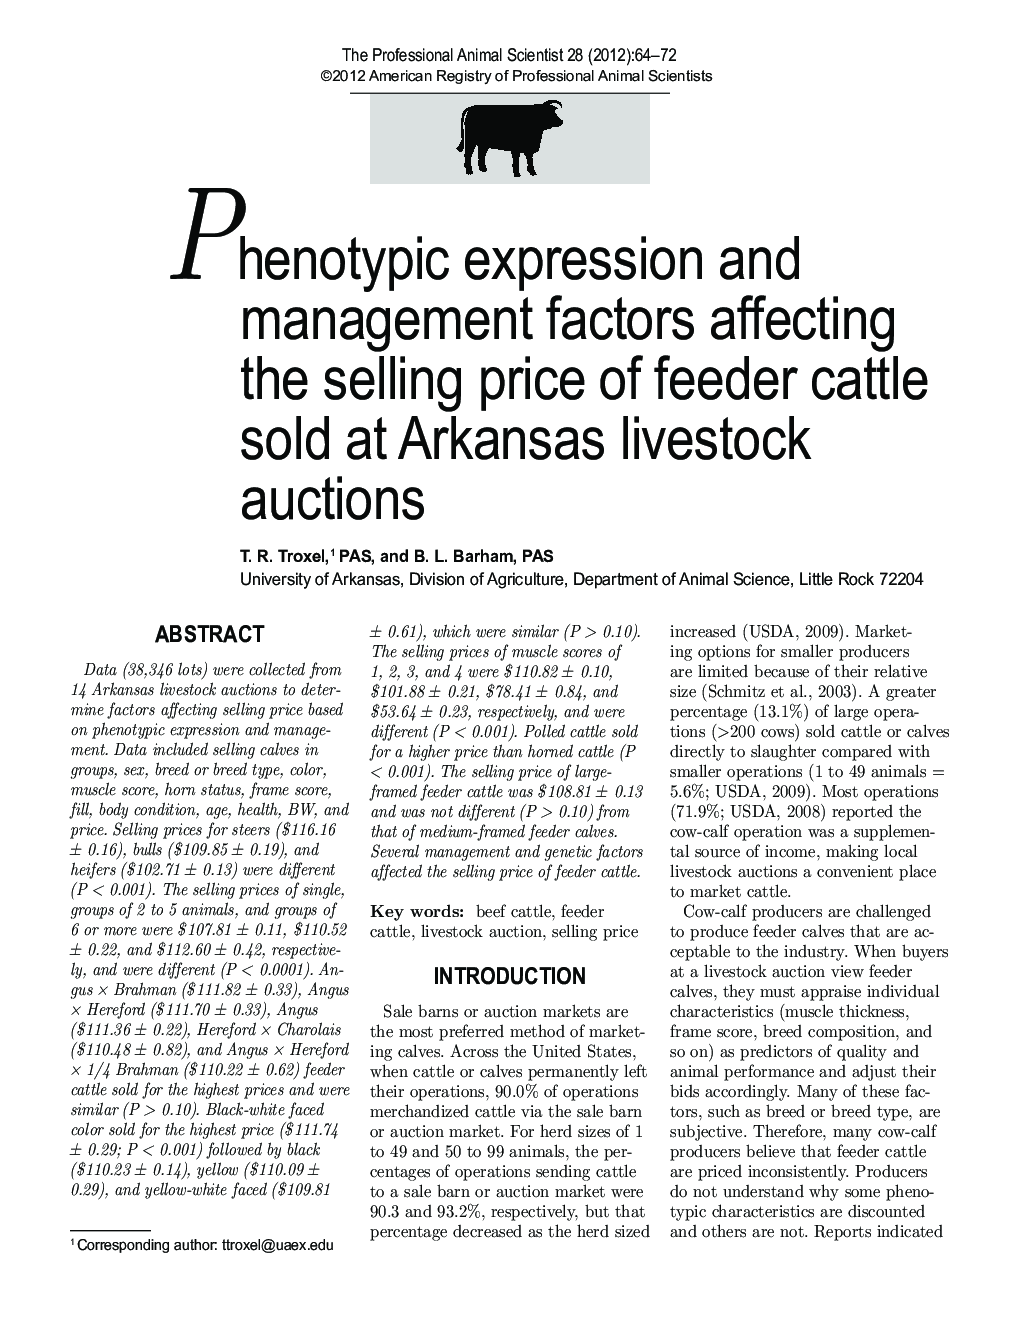 Phenotypic expression and management factors affecting the selling price of feeder cattle sold at Arkansas livestock auctions